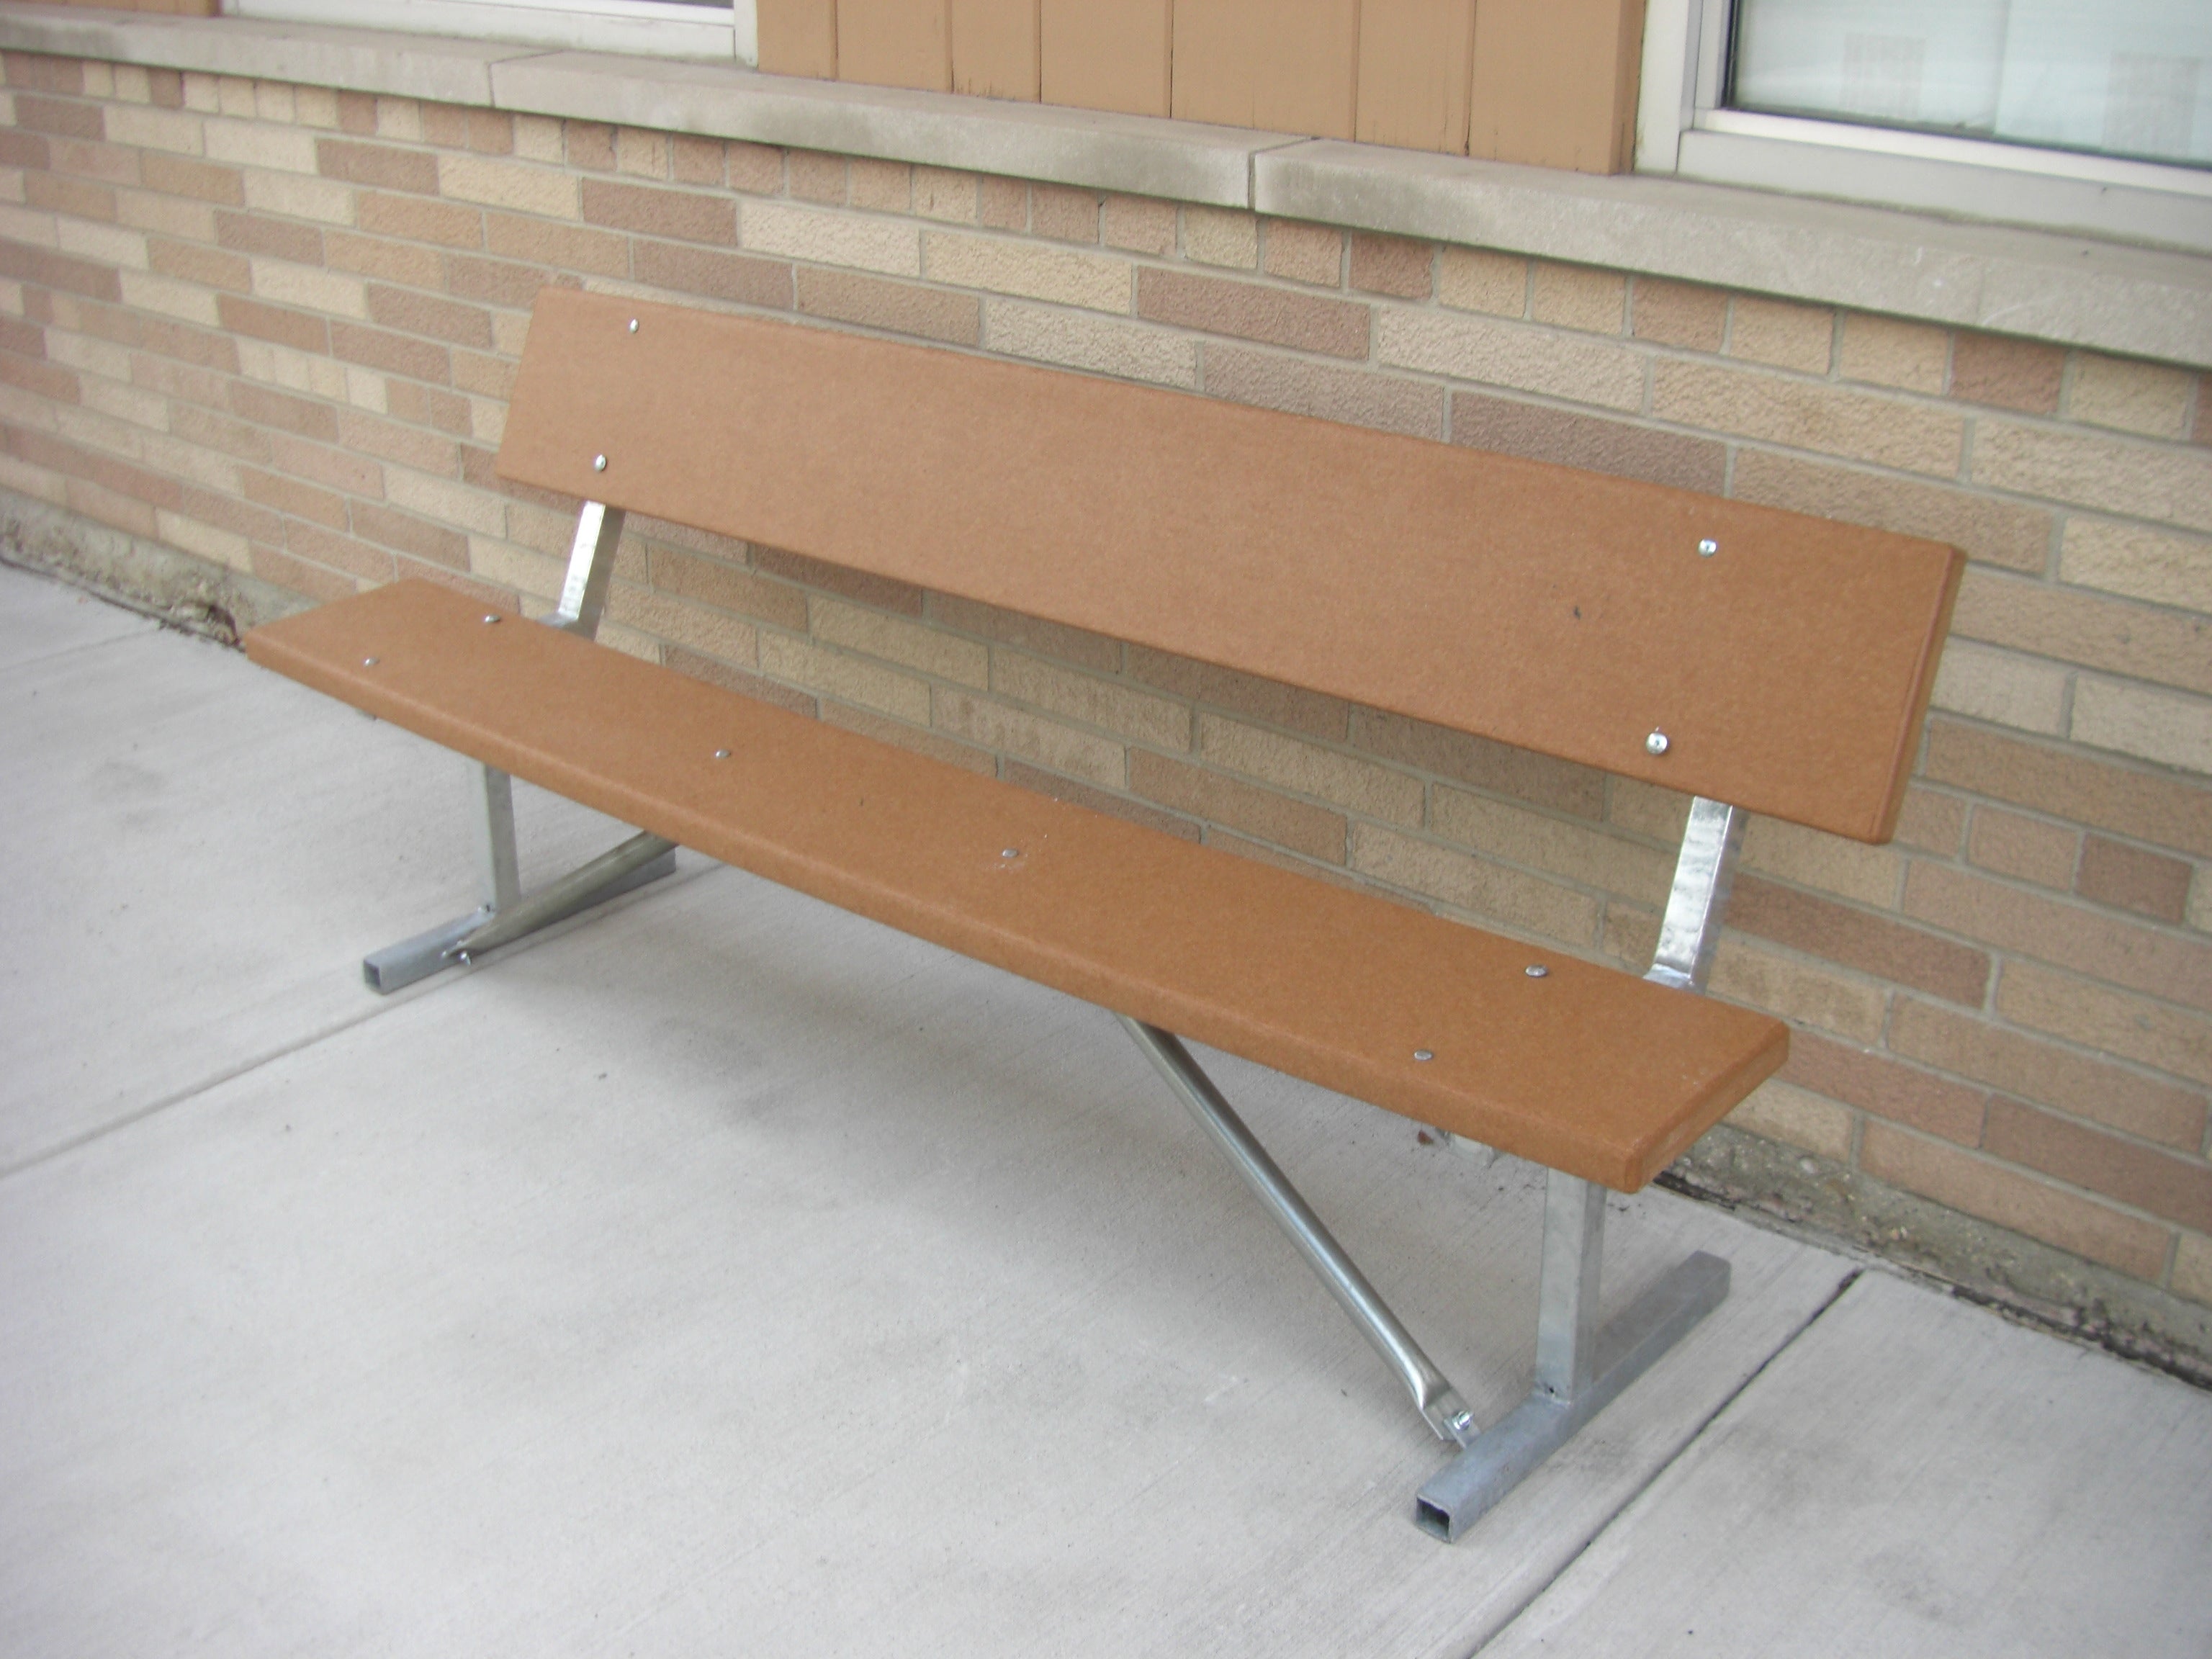 Portable Heavy Duty Park Bench - RECYCLED PLASTIC Lumber